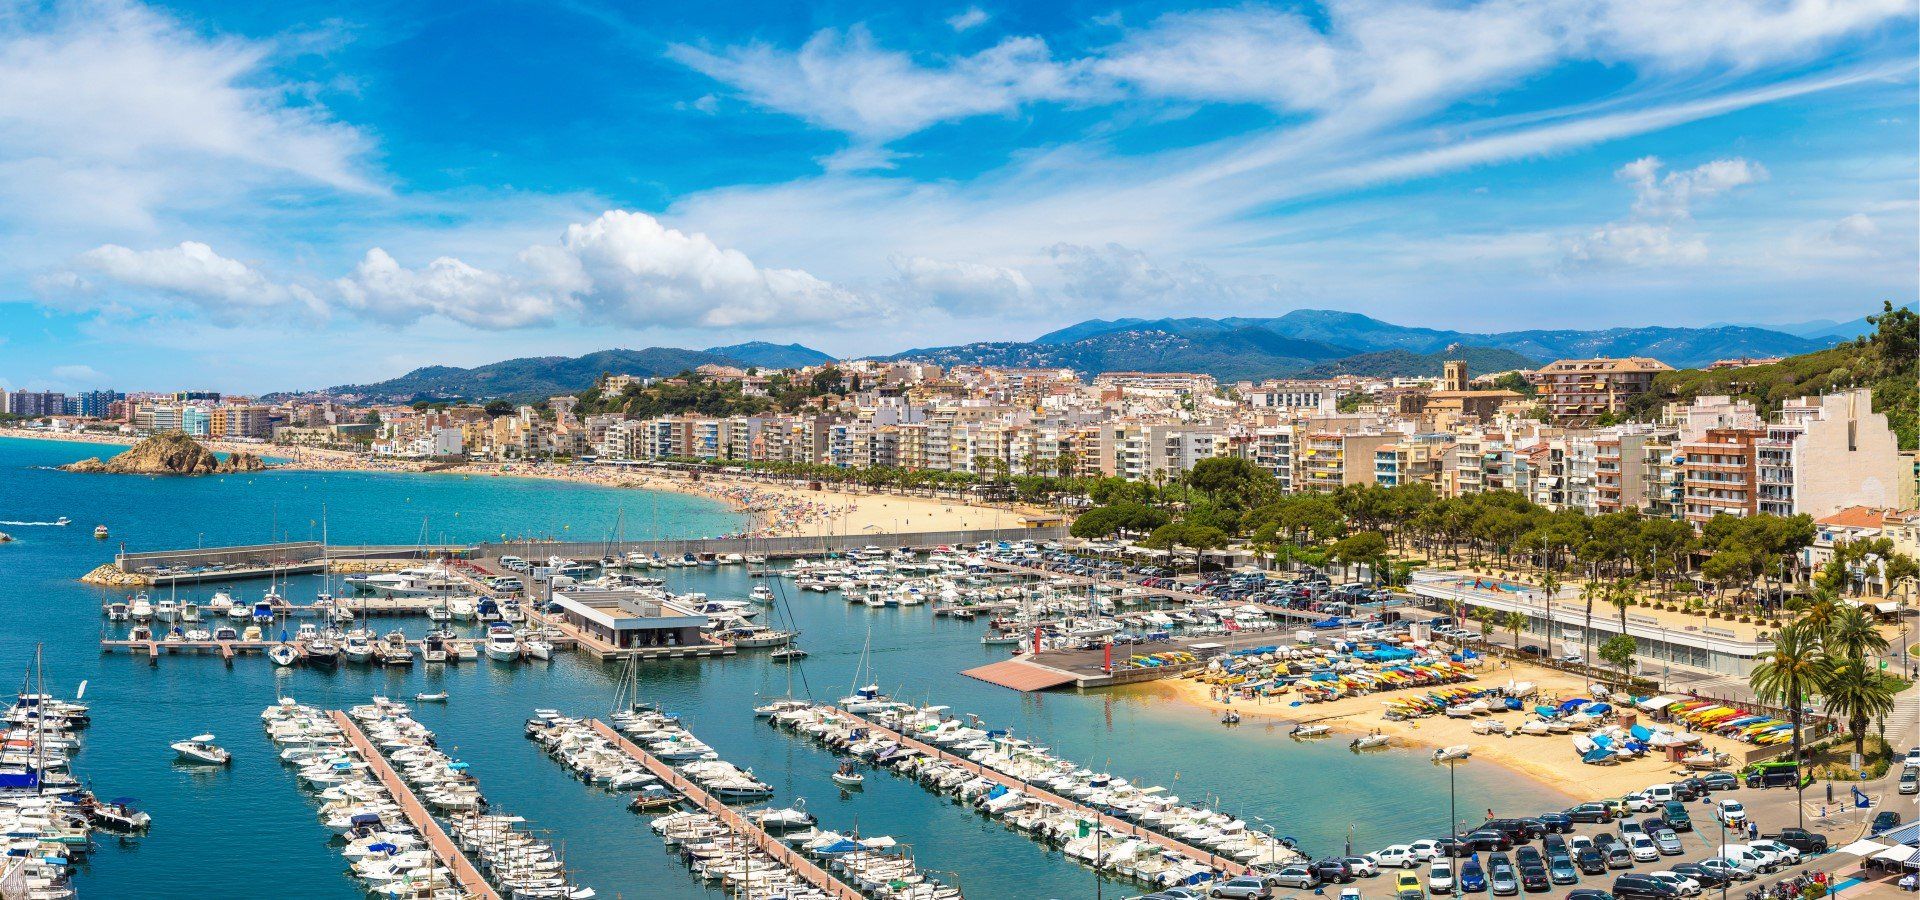 Blanes' port combines fishing and sport, while the marina quay is run by the Blanes Sailing Club